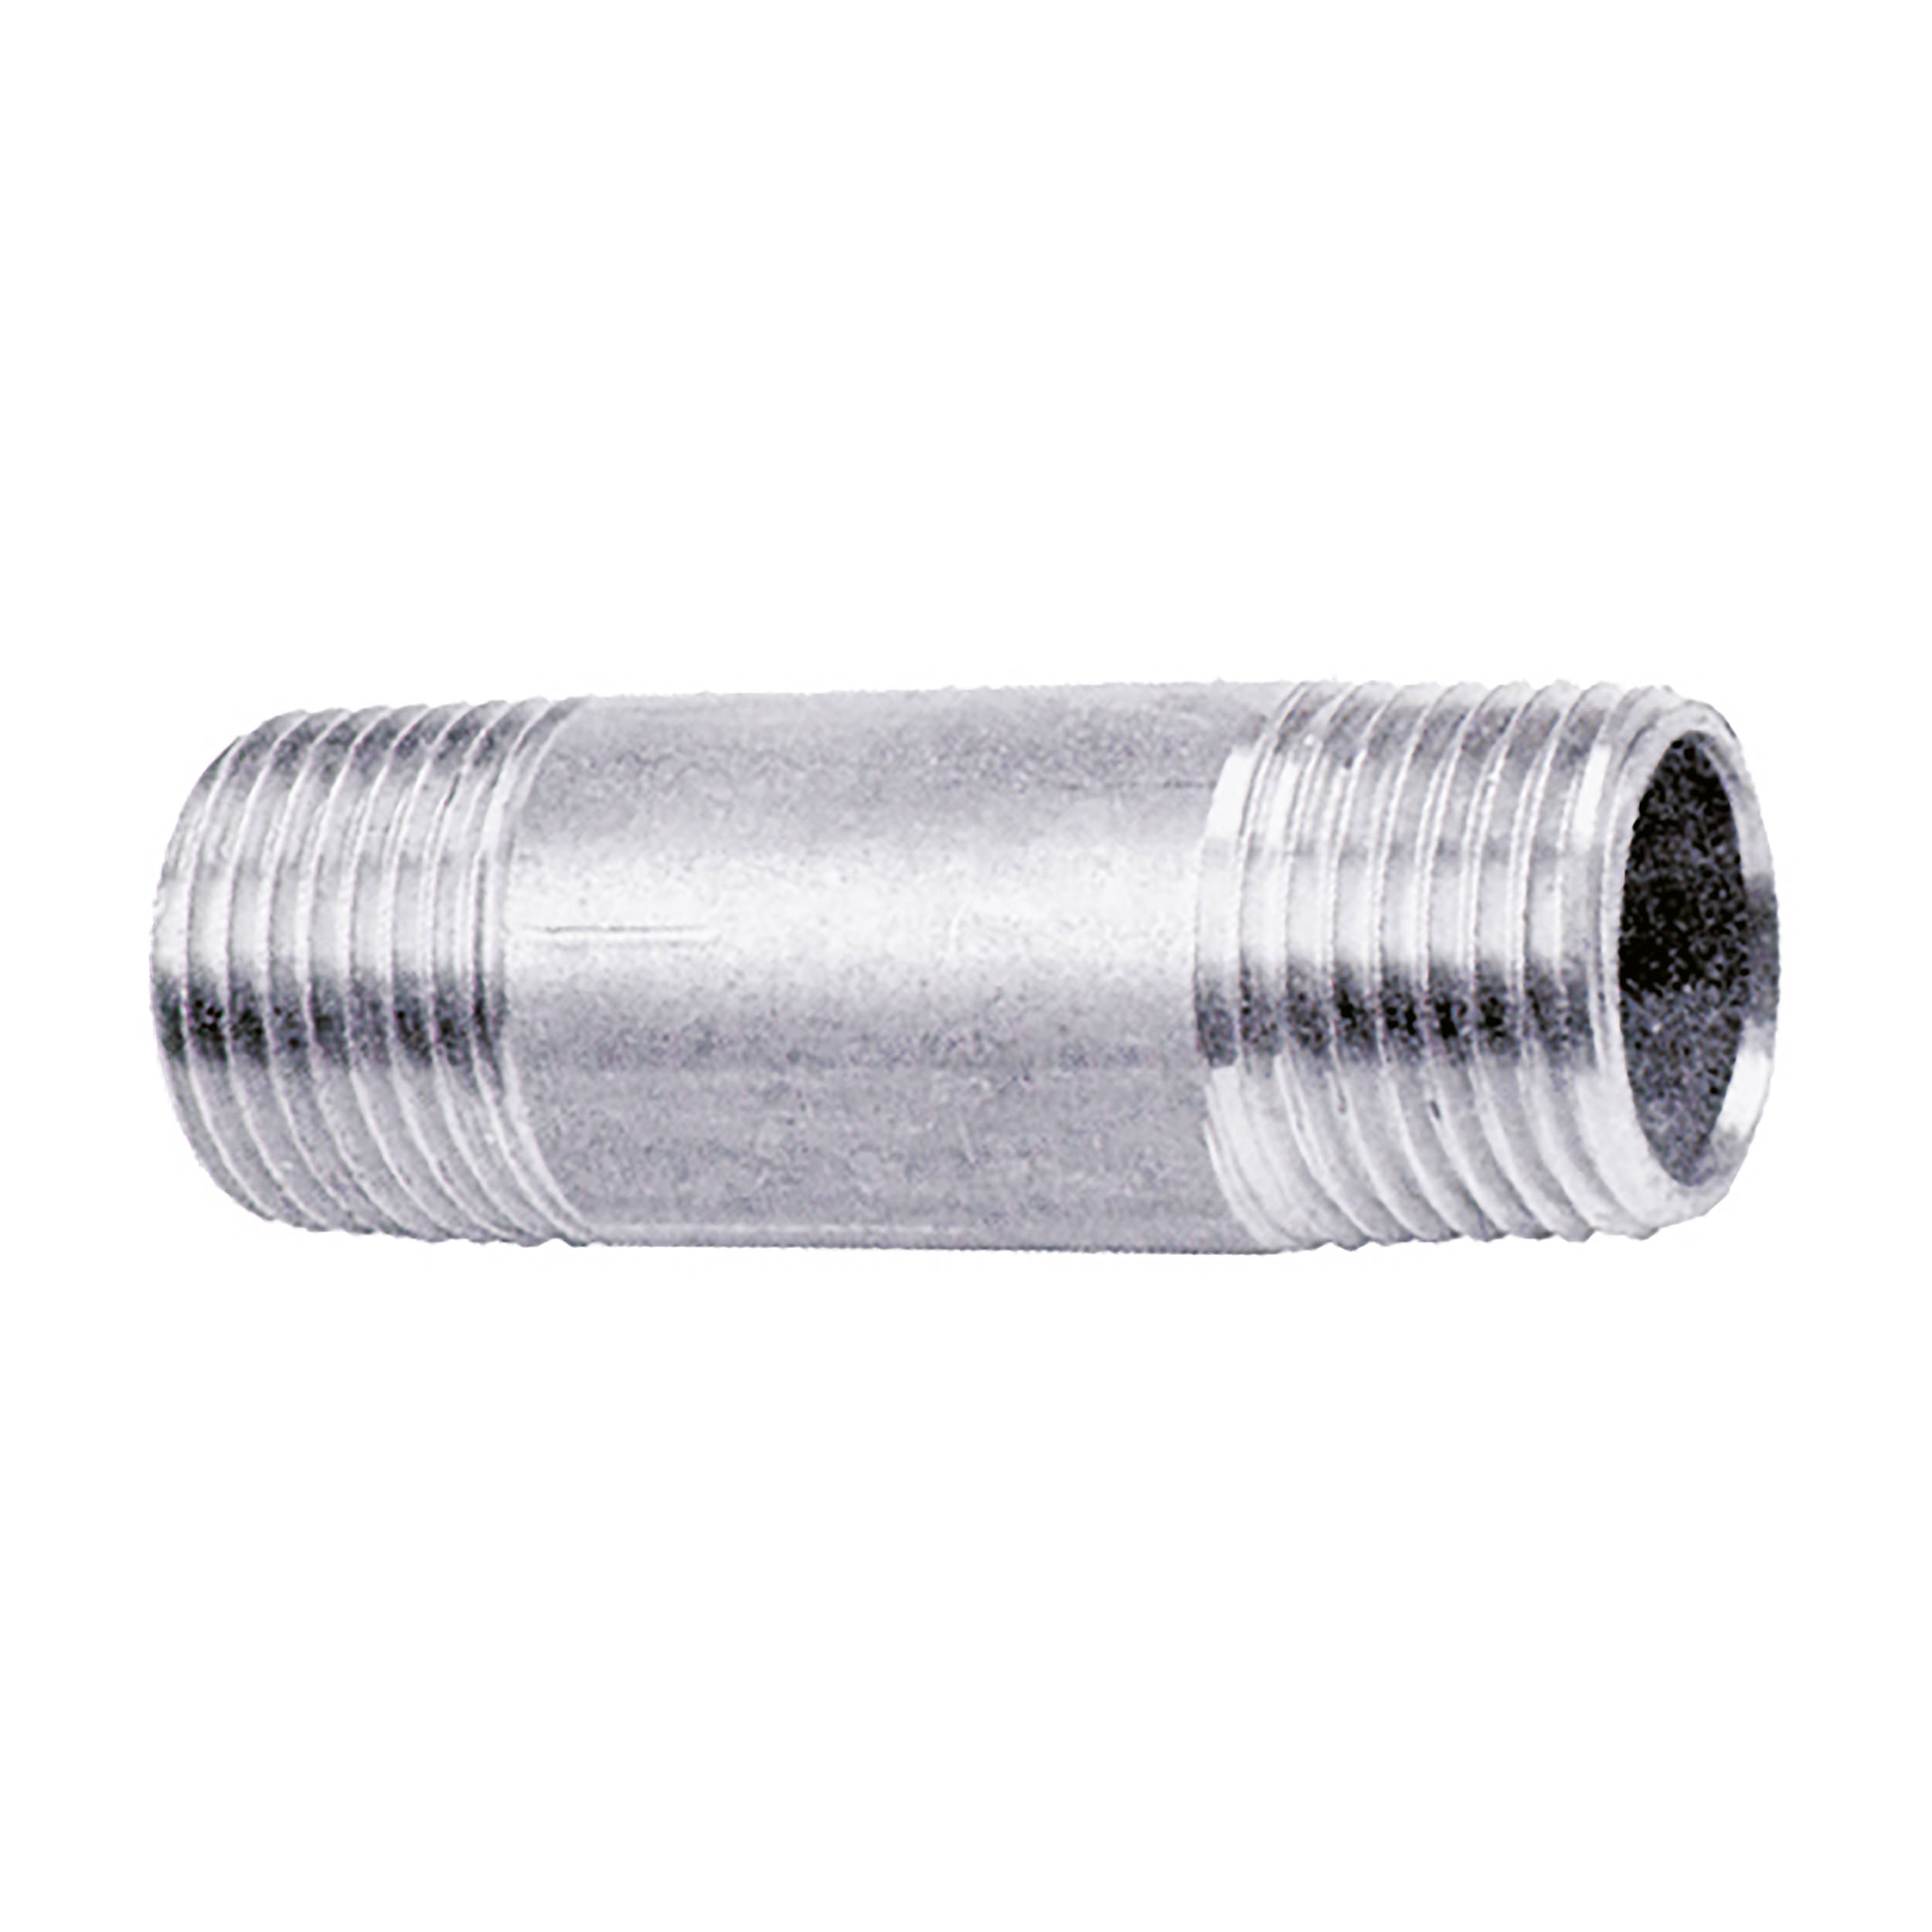 Double pipe nipple stainless steel, V4A, connection: R⅛ male (conical male thread acc. to ISO 7/1), DN 6, Ø10 mm, L: 40 mm